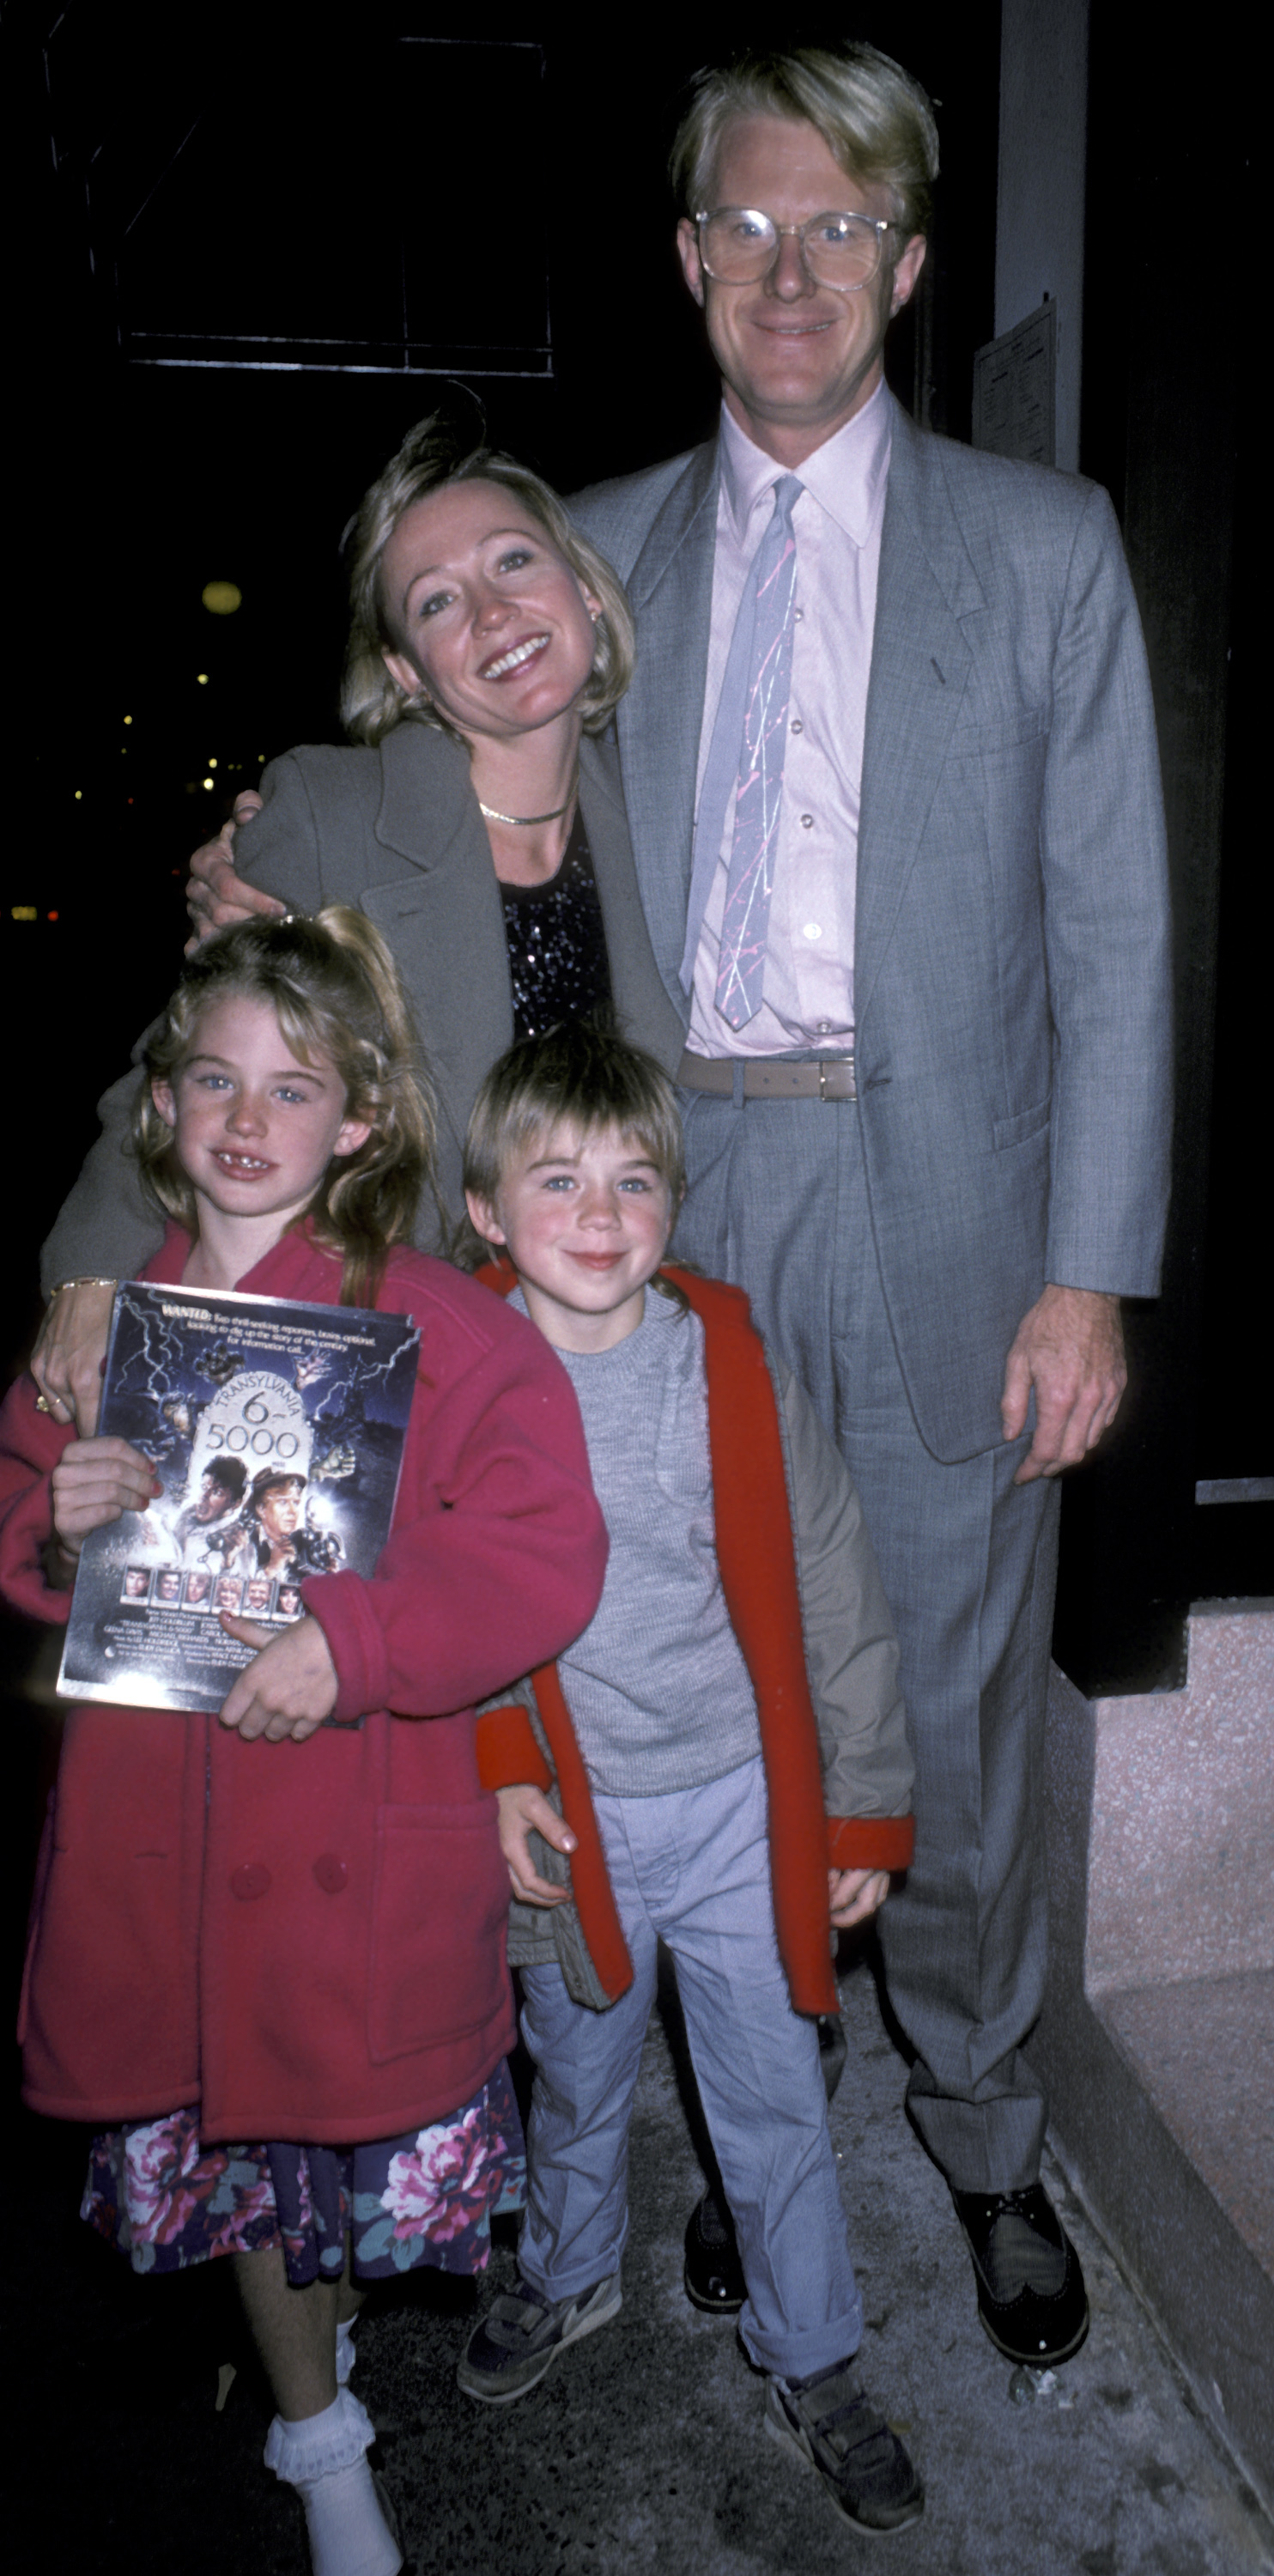 Ingrid Taylor, Ed Begley Jr., Amanda Begley, and Nicholas Taylor Begley pose at the premiere party for "Transylvania 6-5000" on October 30, 1985. | Source: Getty Images